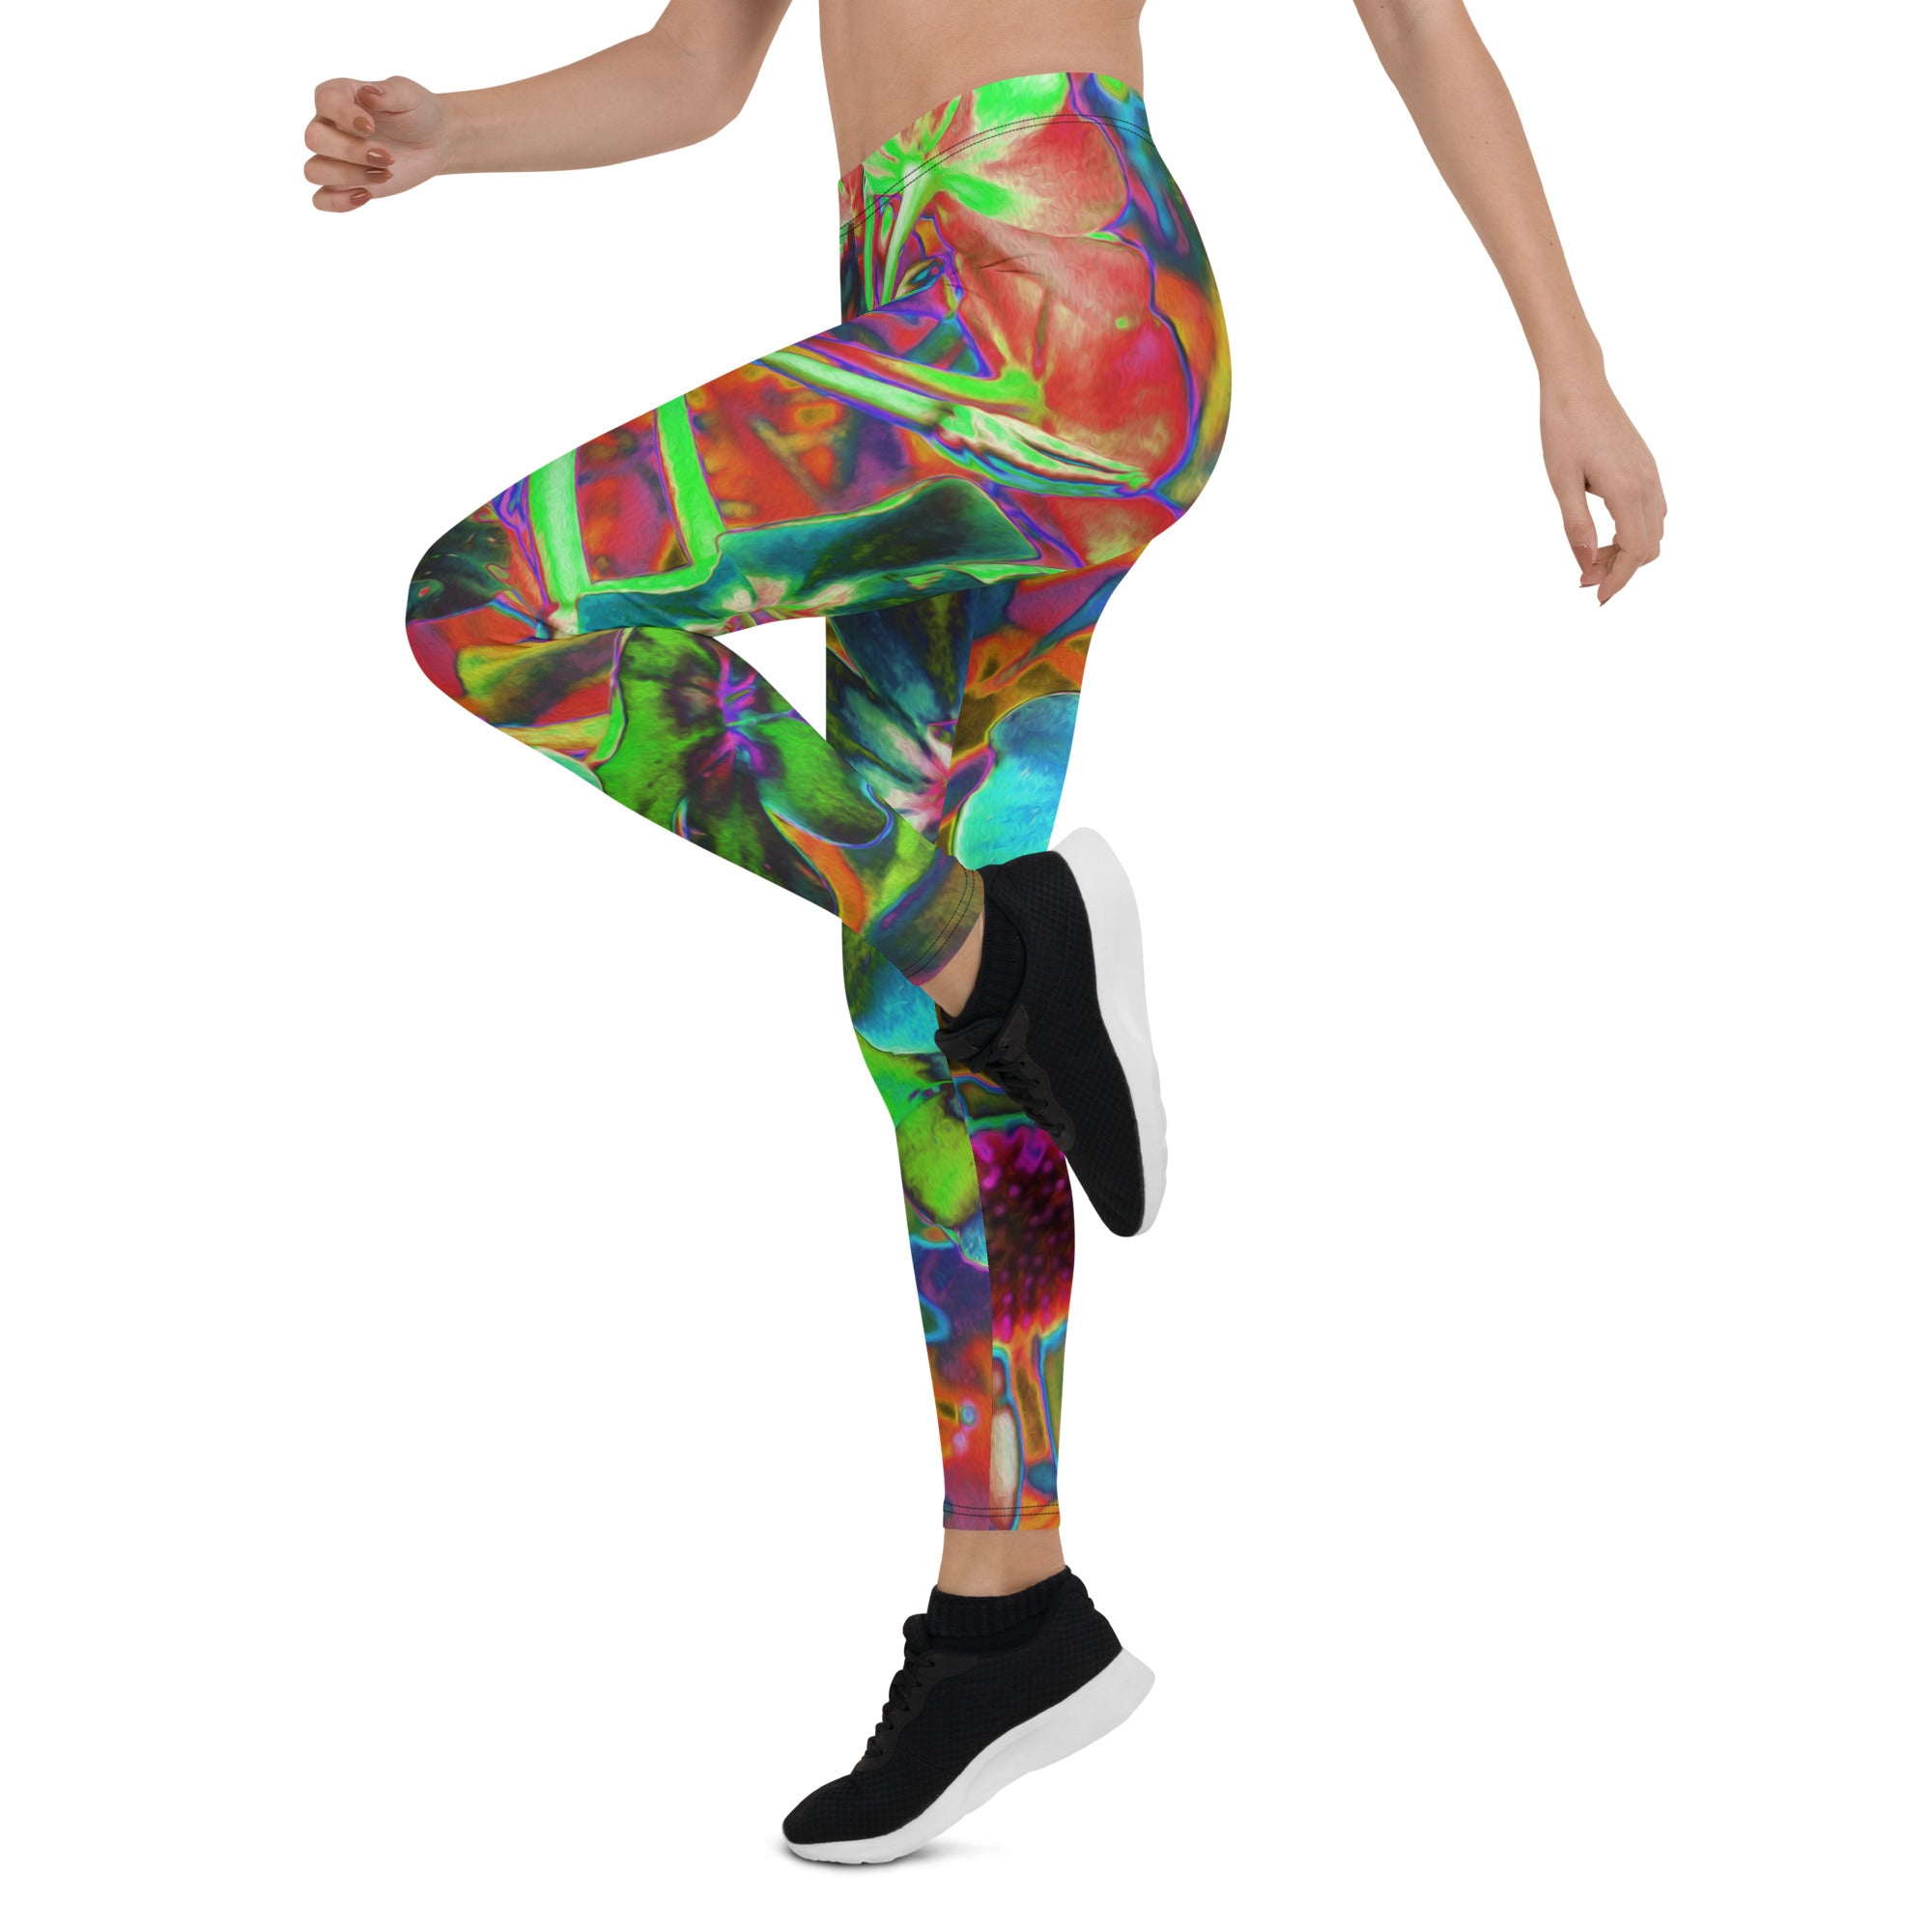 Leggings for Women - Blooming Abstract Blue and Lime Green Flower